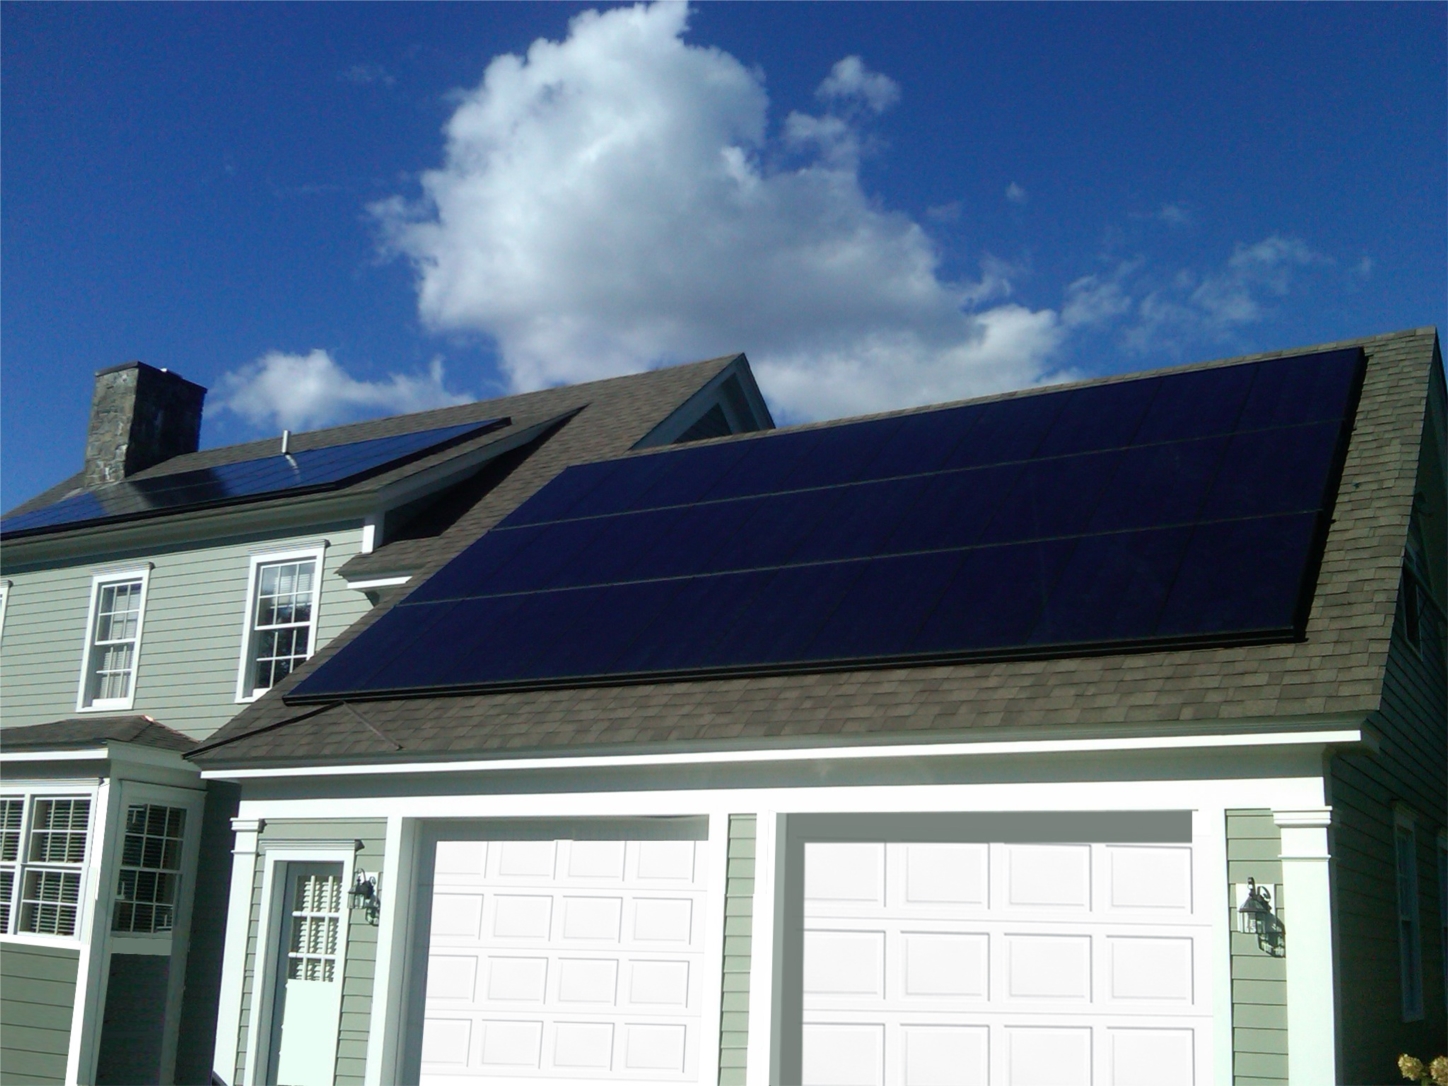 This is one example of over 1,000 solar electric systems installed by Hudson Solar.